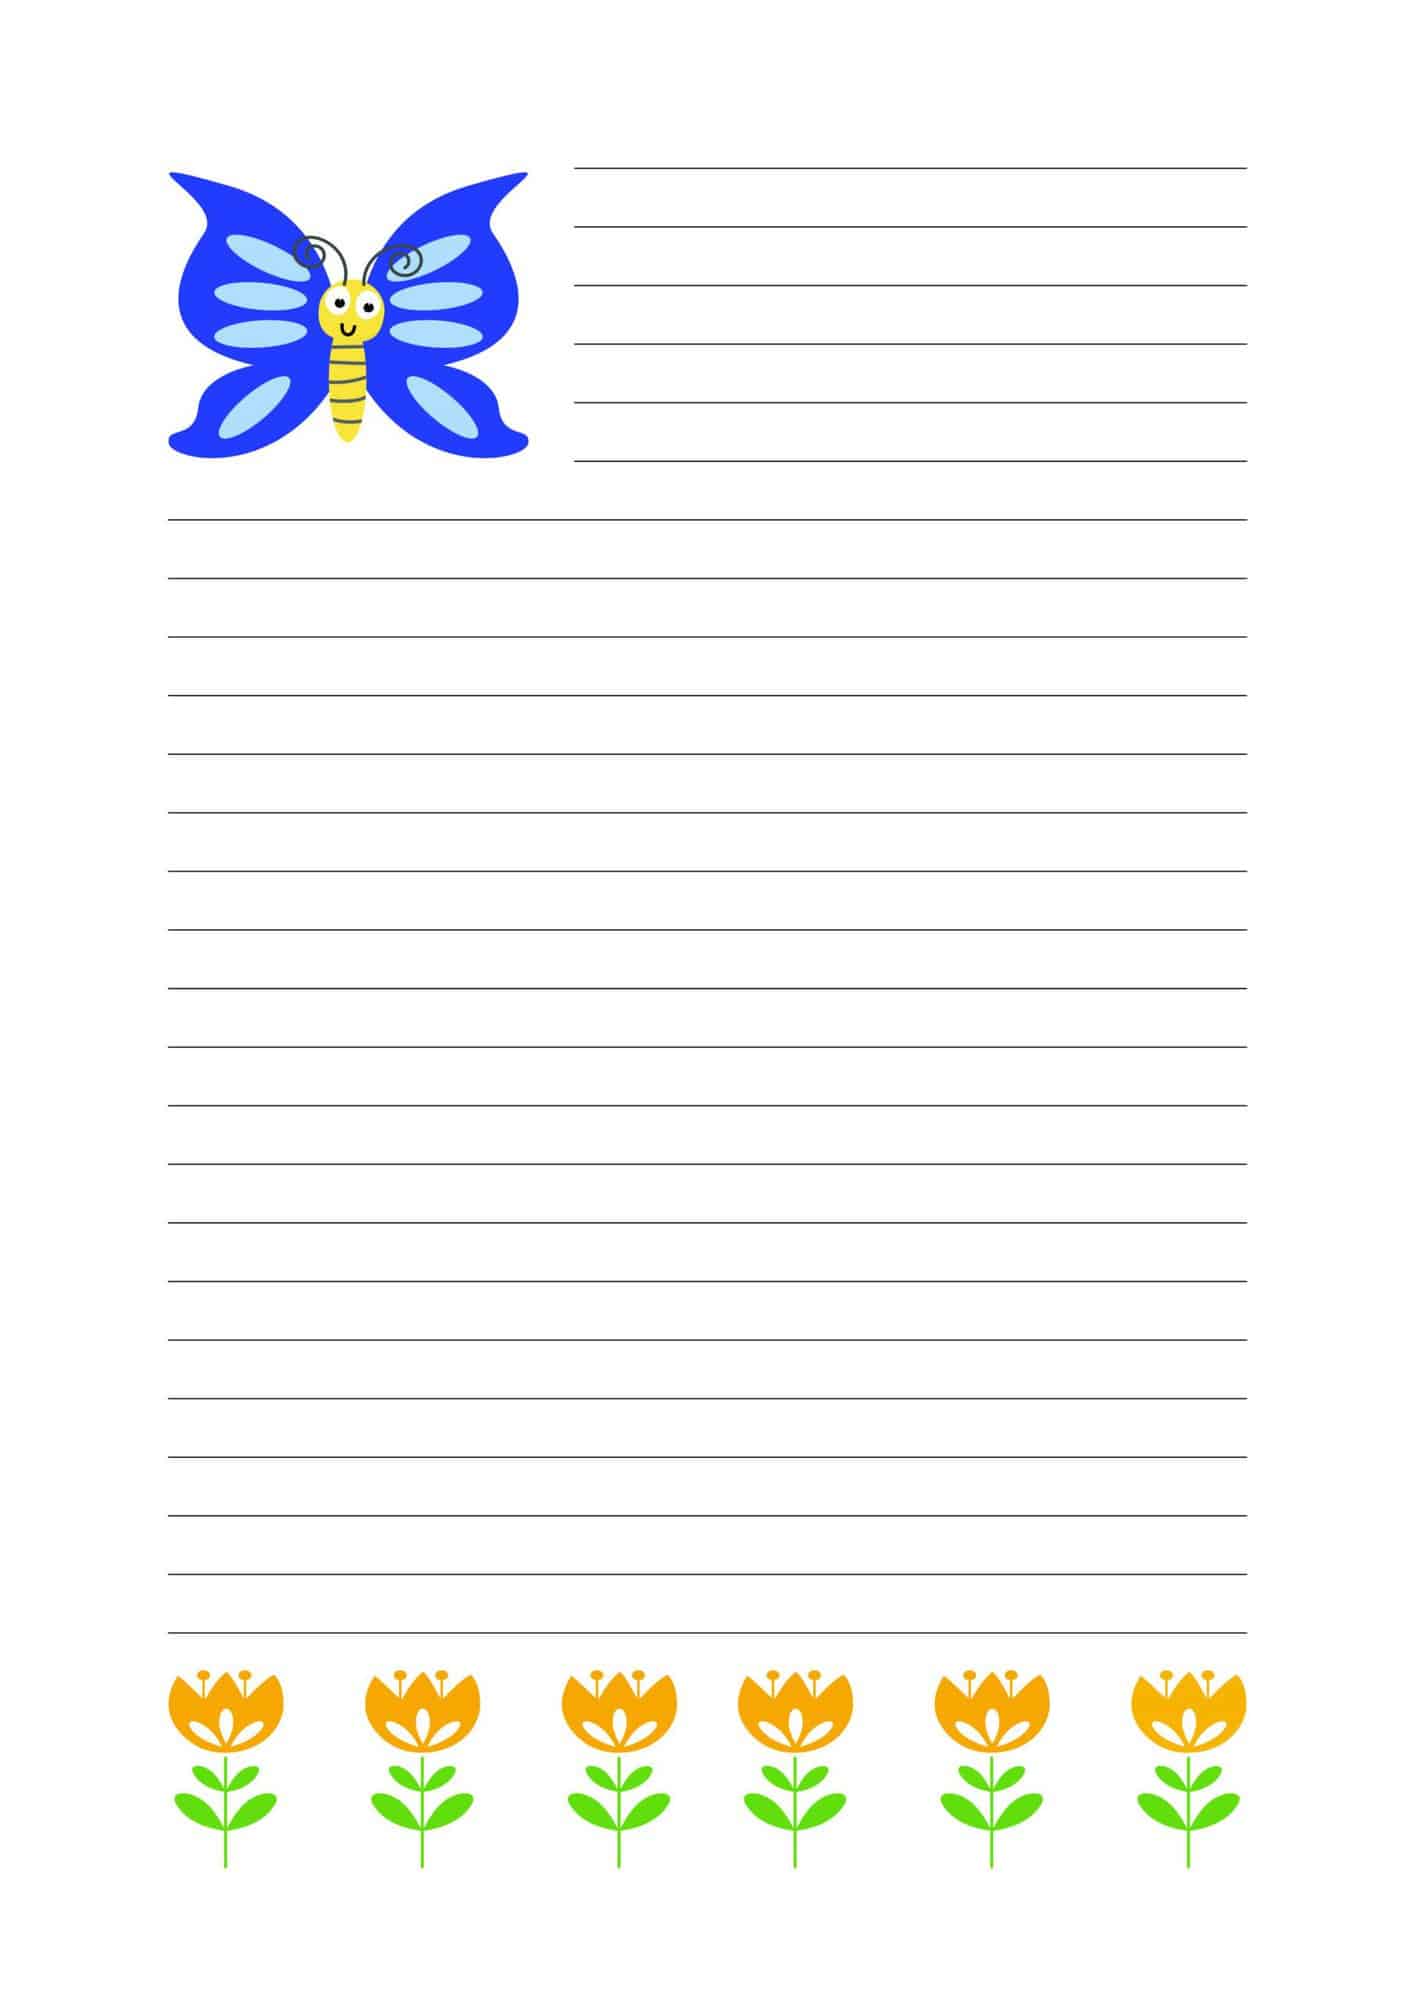 Lined template with blue butterfly and yellow flowers.